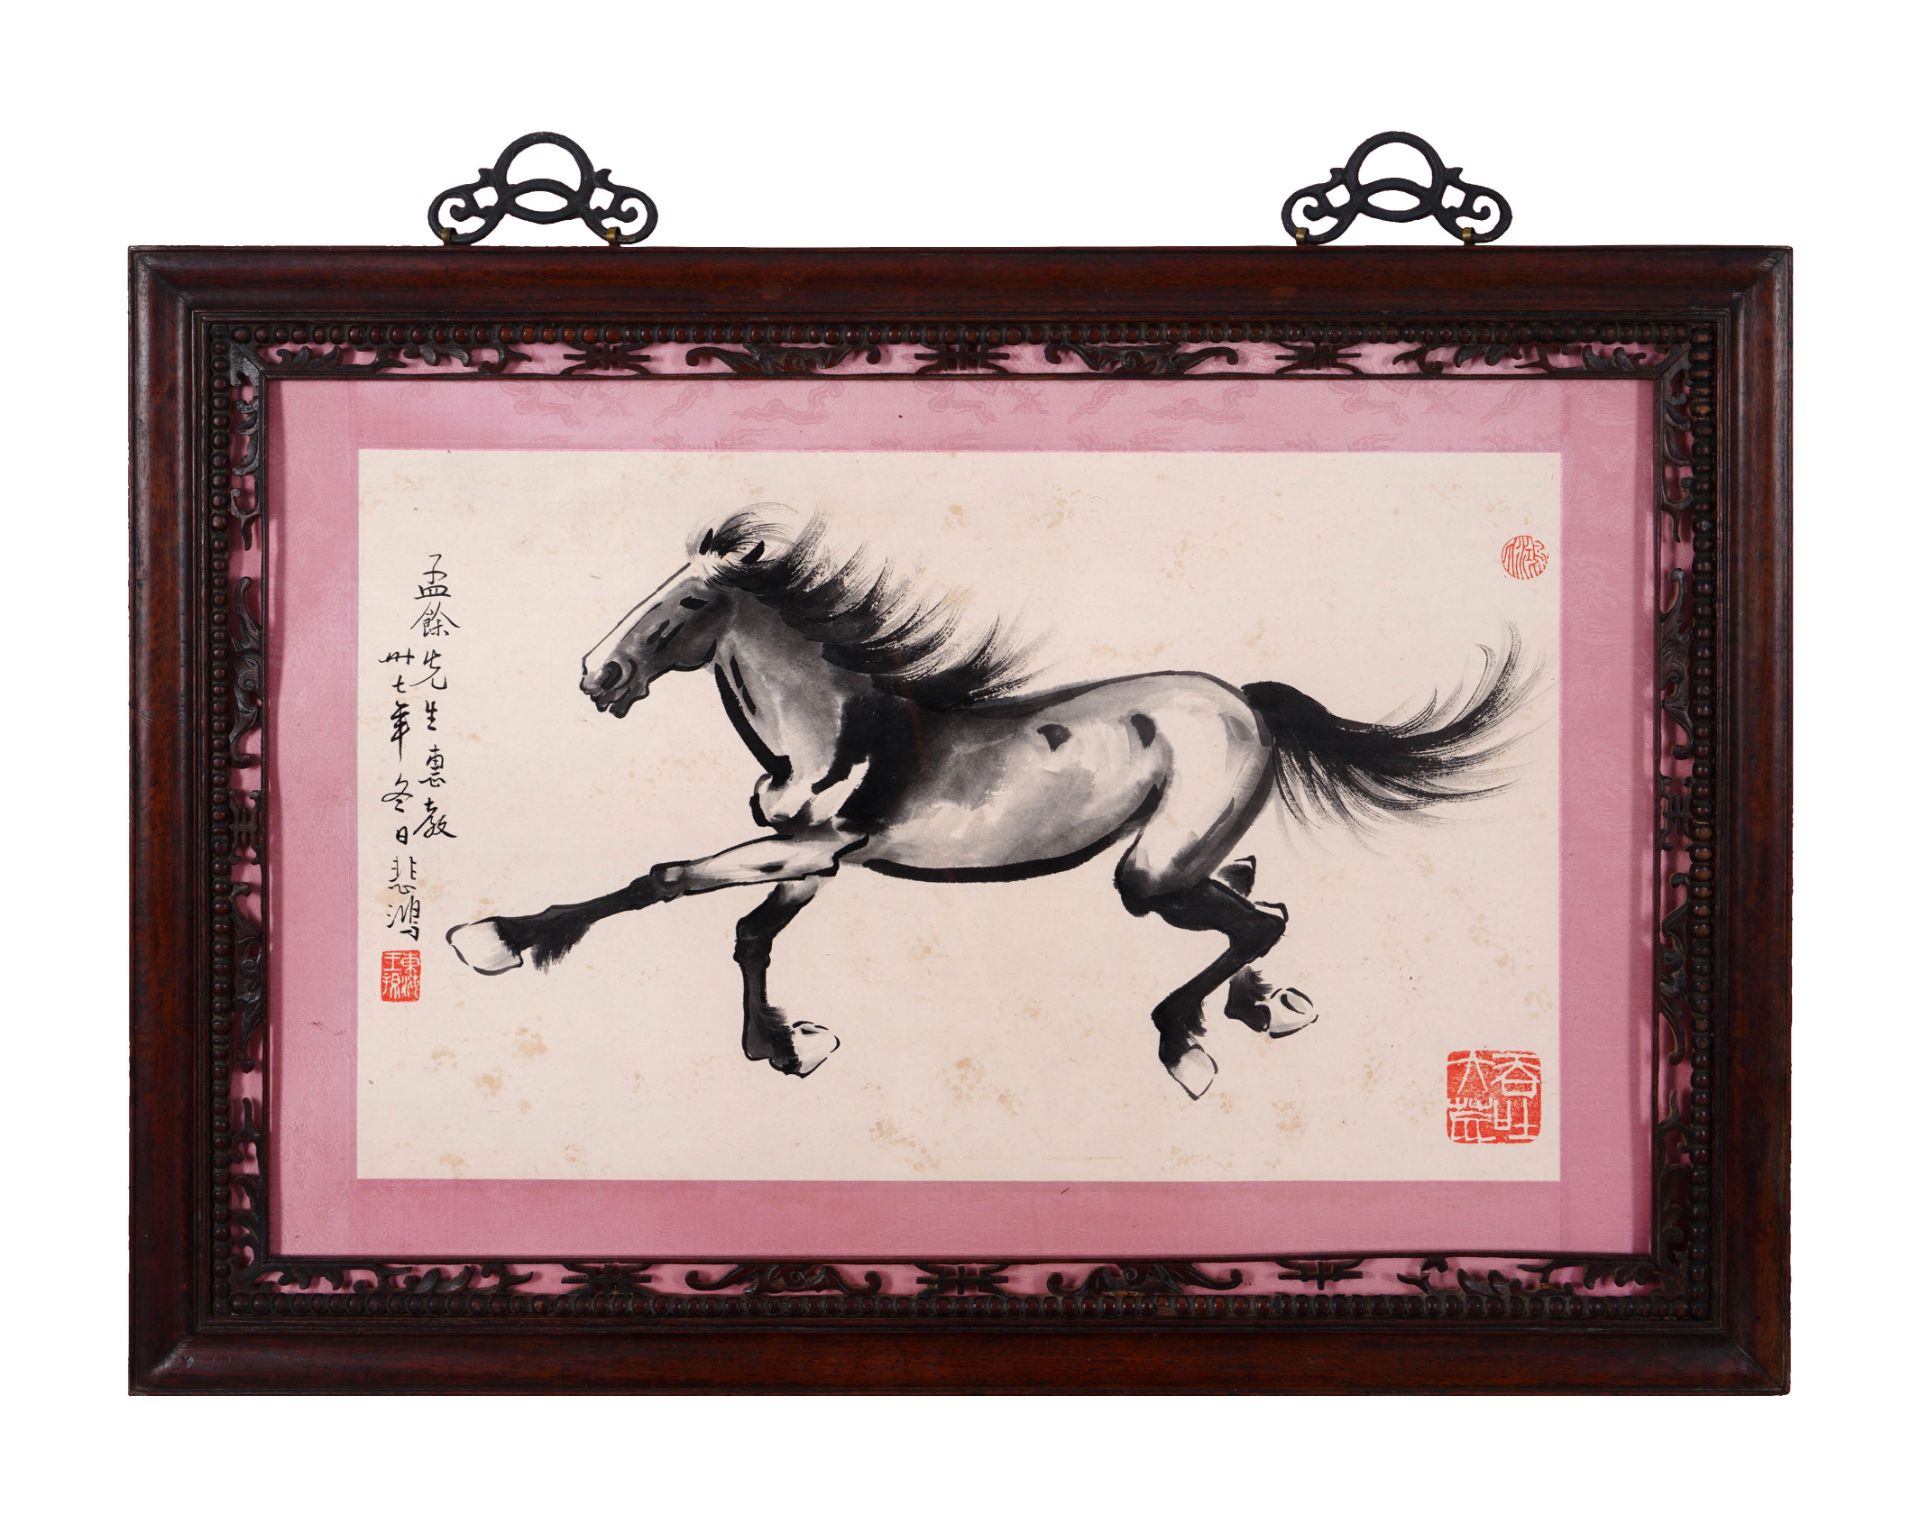 A Chinese Frame Painting By Xu Beihong - Image 2 of 15